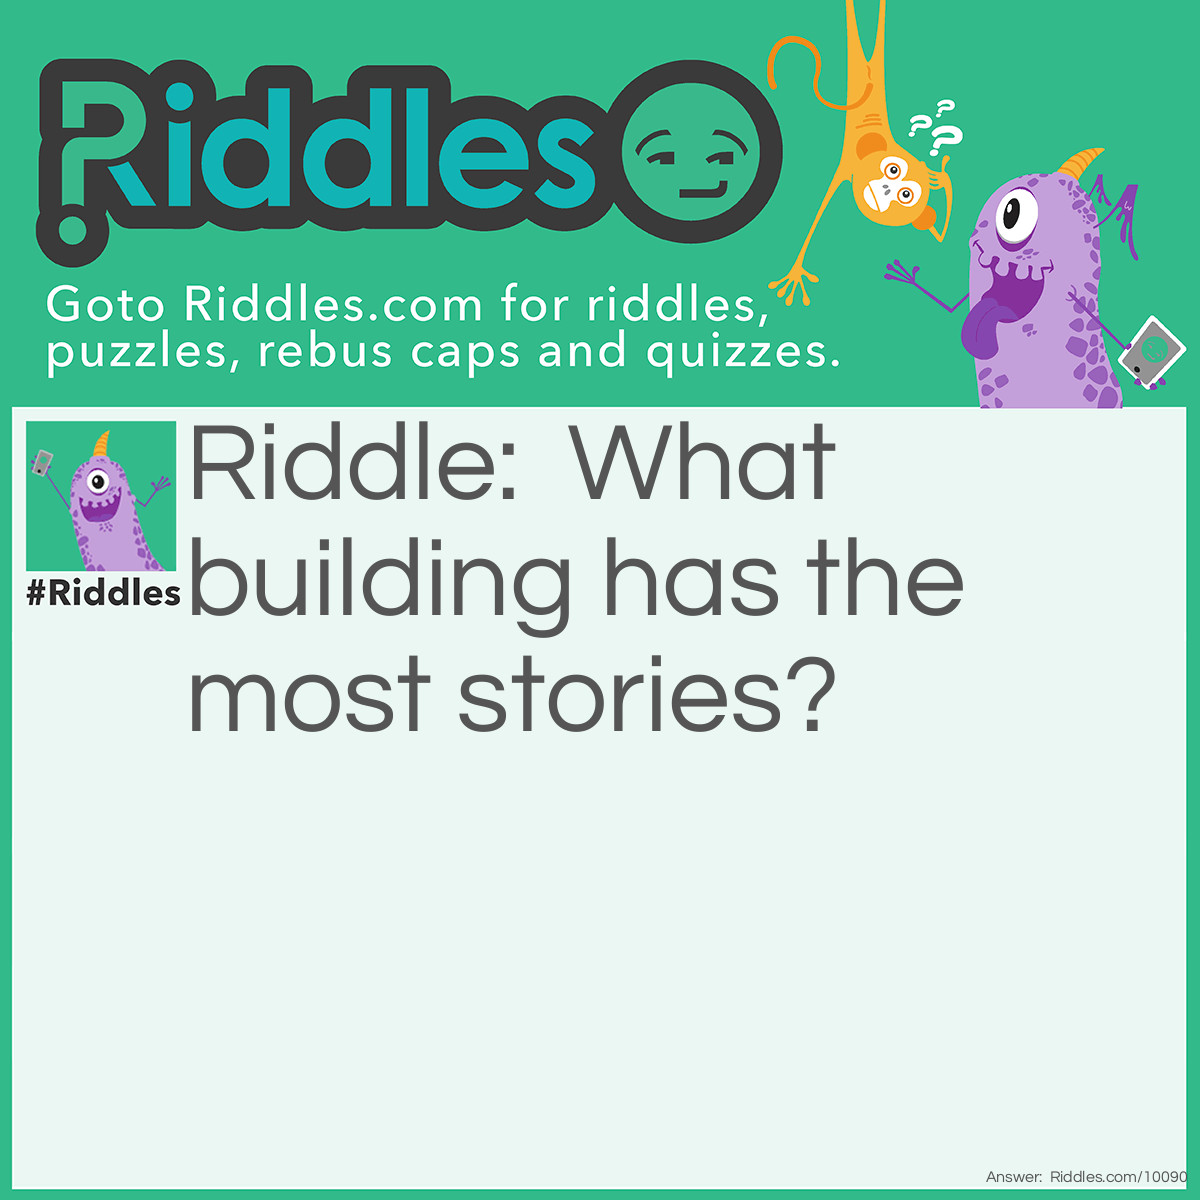 Riddle: What building has the most stories? Answer: a library